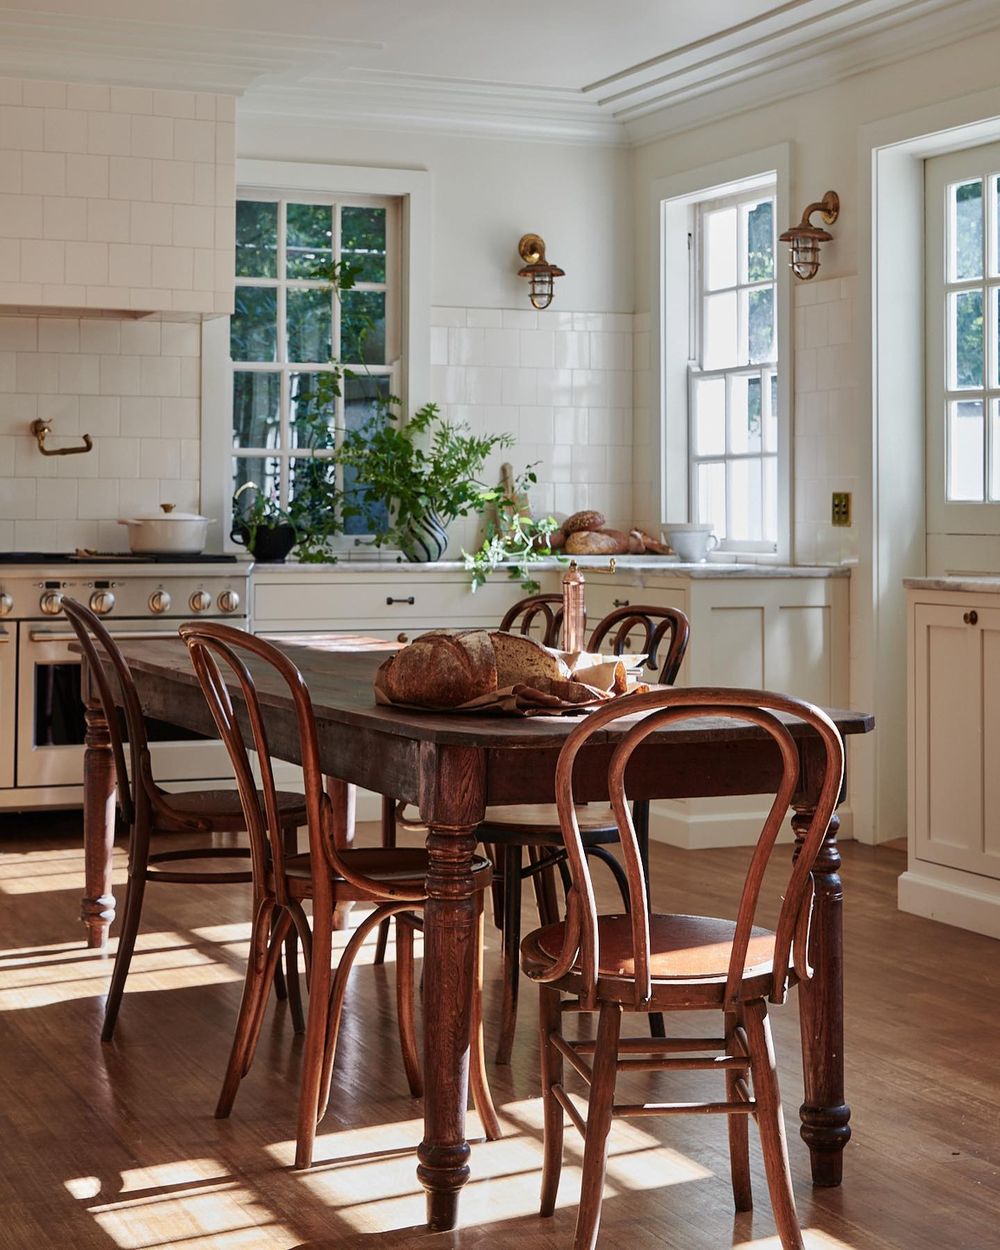 Traditional kitchen Bentwood chairs leannefordinteriors